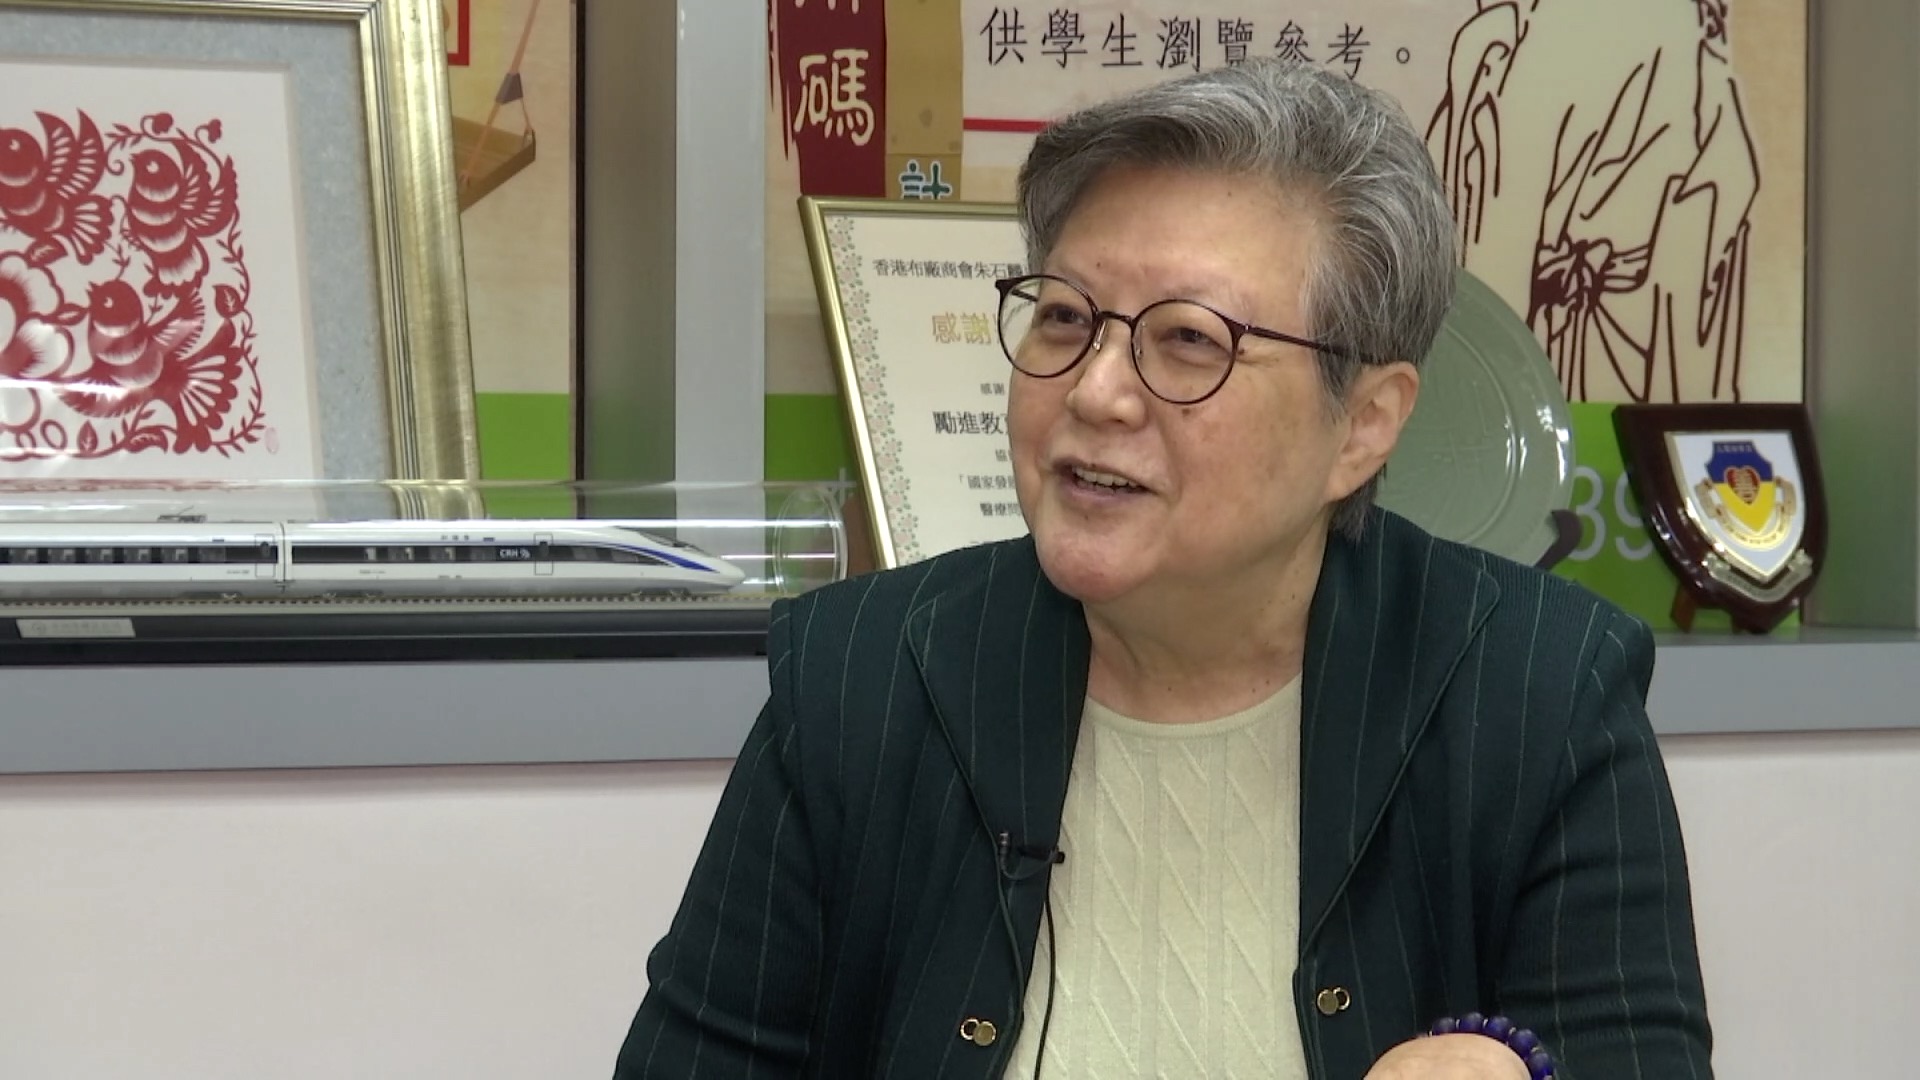 Former LegCo president: HK needs a better electoral system in place